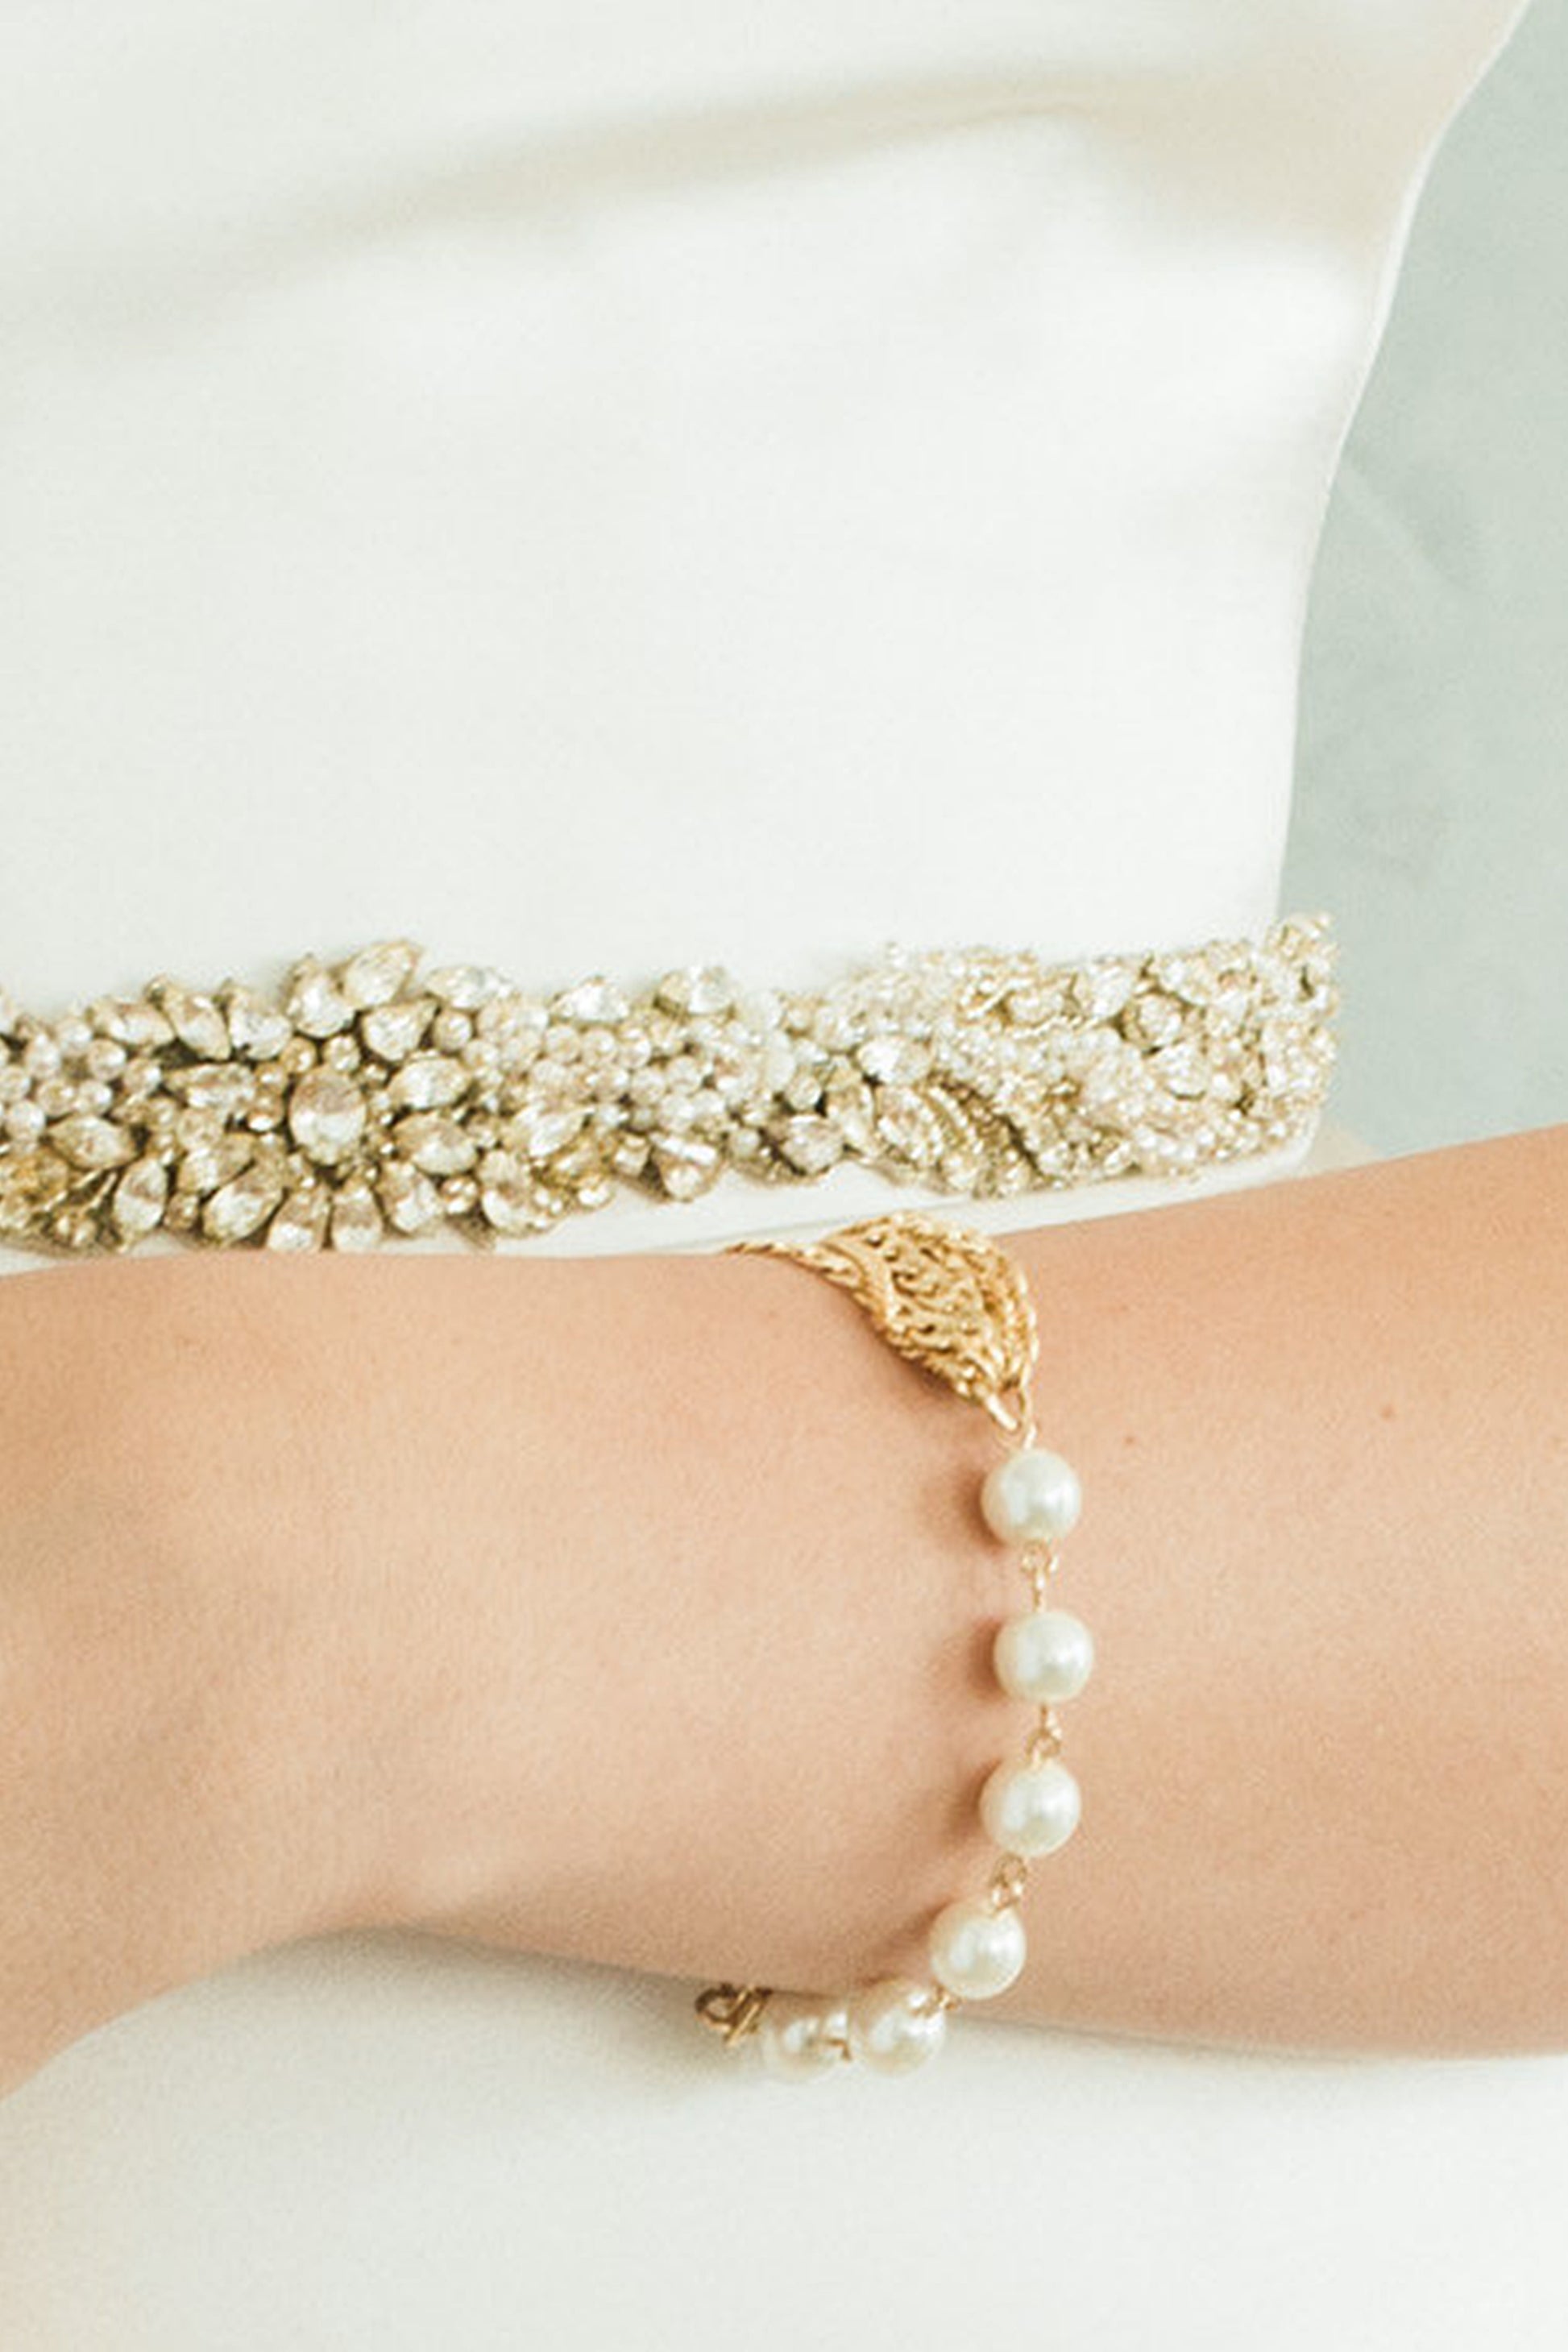 Gold Bracelet Pearl Bead Bracelet Gold Chain Charm Bracelet Pearl Dainty Layering Bracelet Bridesmaid Gift Boho Wedding Jewelry Simple, KAI bracelet for Her, for Bride, for Bridesmaid Gift , for Mother of the Bride, for Wedding Guest or Special Occasion by Camilla Christine Bridal Jewelry and Wedding Accessories. Bridal Style Inspiration Trends for Bride, Wedding Ideas